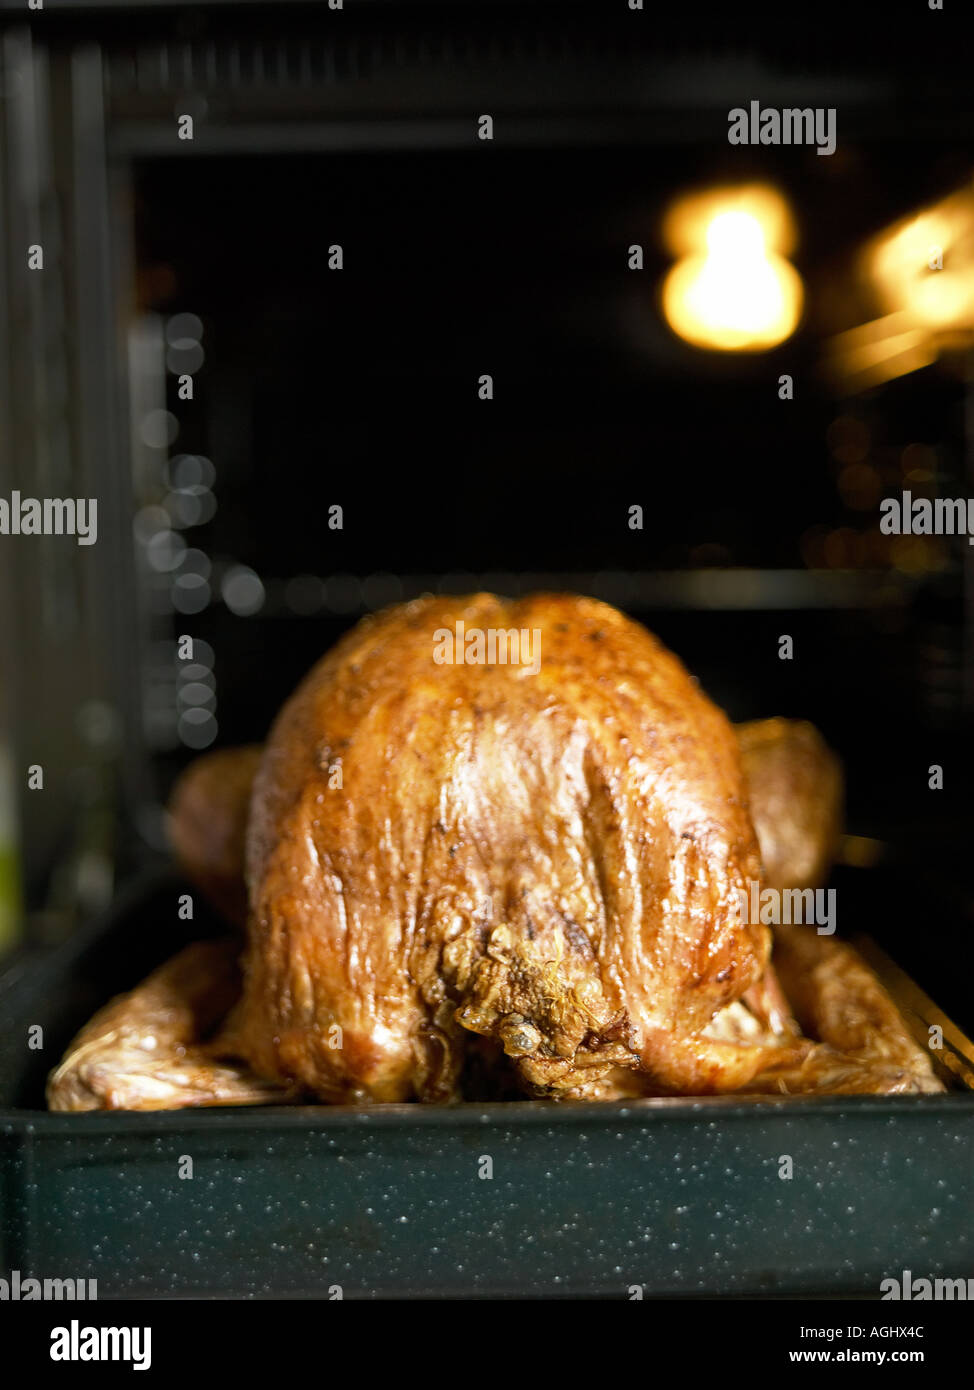 https://c8.alamy.com/comp/AGHX4C/a-cooked-turkey-fresh-from-the-oven-AGHX4C.jpg